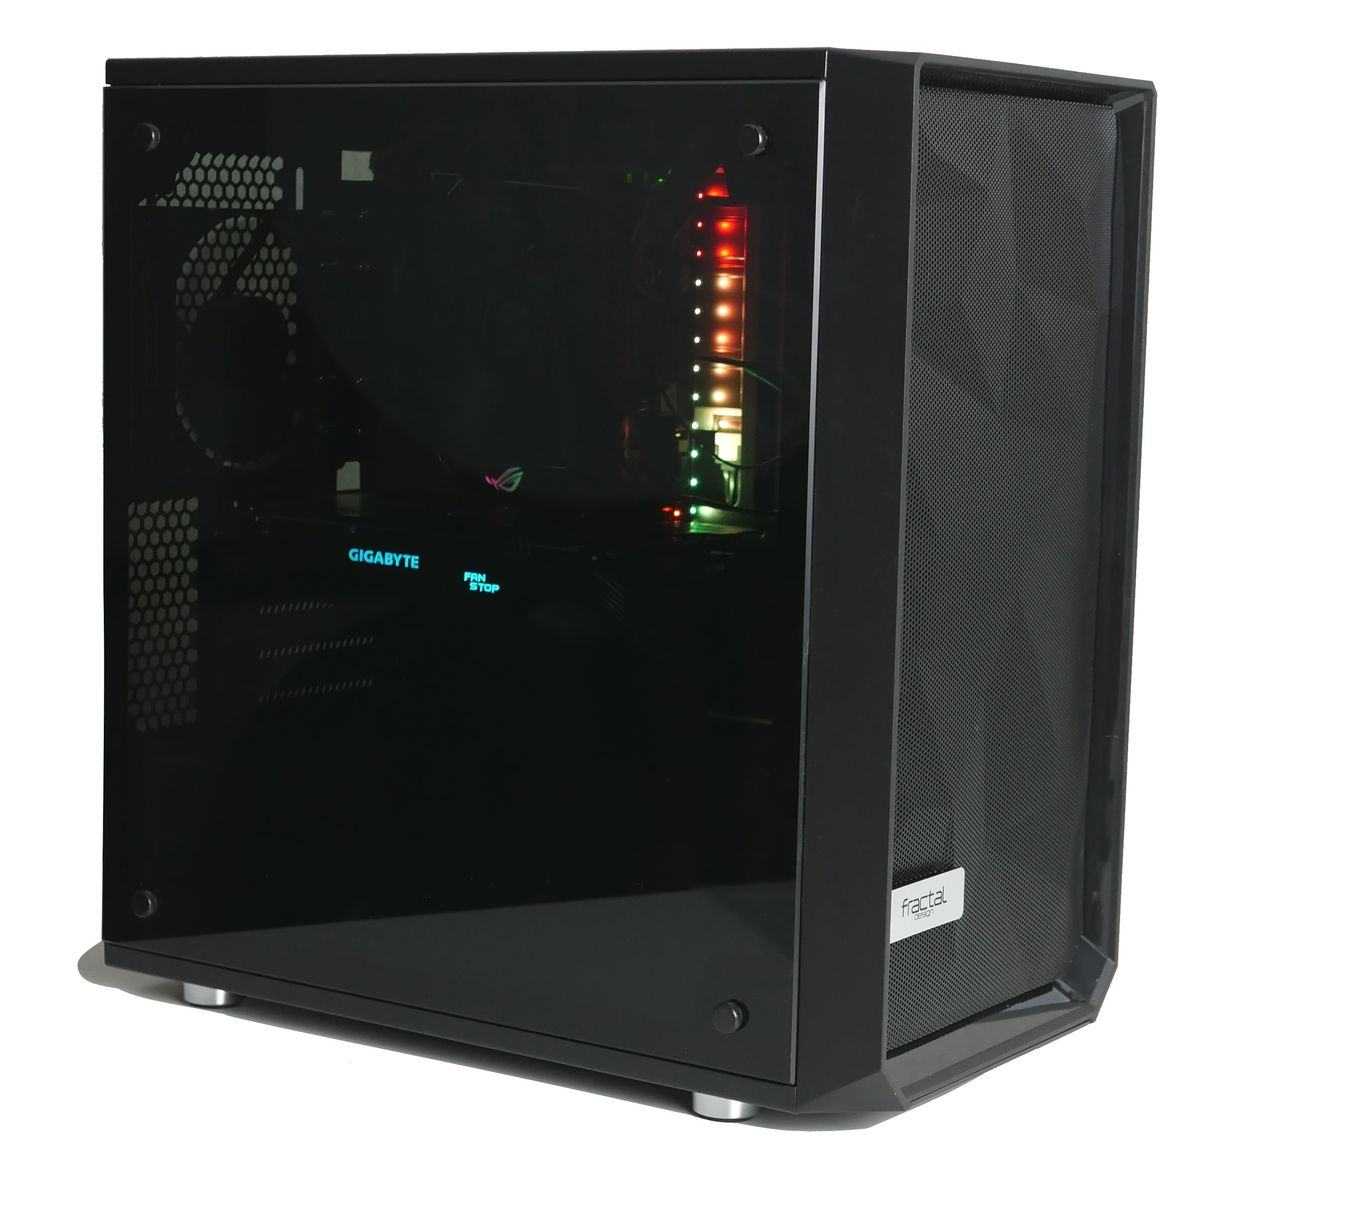 Fractal design meshify c mini -compact mini tower computer case -matx layout -airflow/cooling -2x fans included -psu shroud -modular interior -water-cooling ready -usb3.0 -tempered glass -blackout